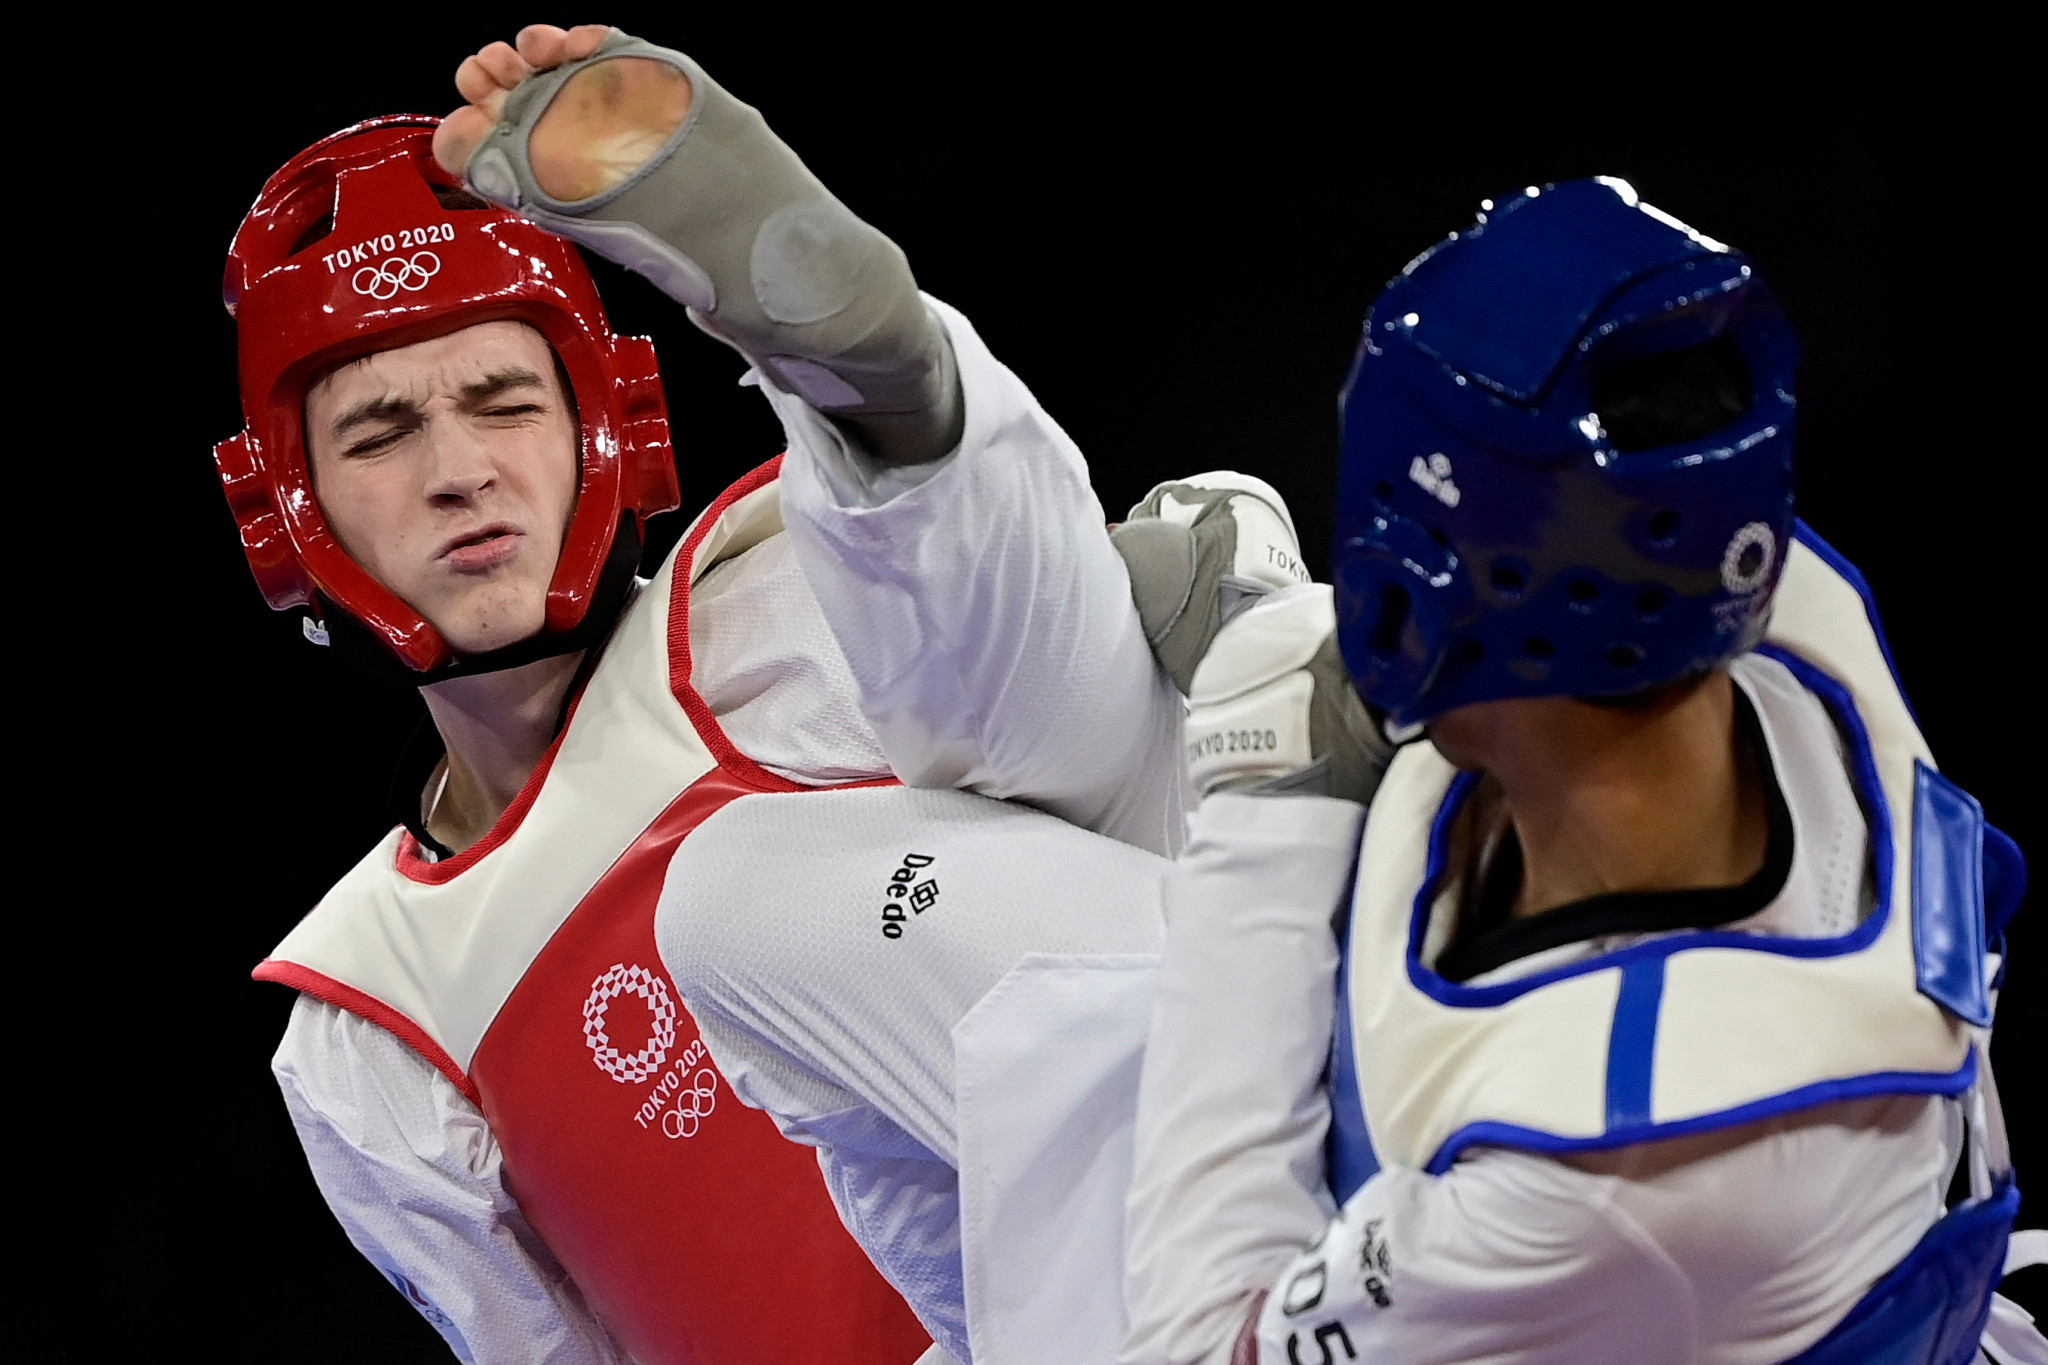 Maxim Khramtsov was one of two Russian Olympic champions absent from the World Taekwondo Championships, with Oleg Matytsin believing that the competition suffered as a result ©Getty Images